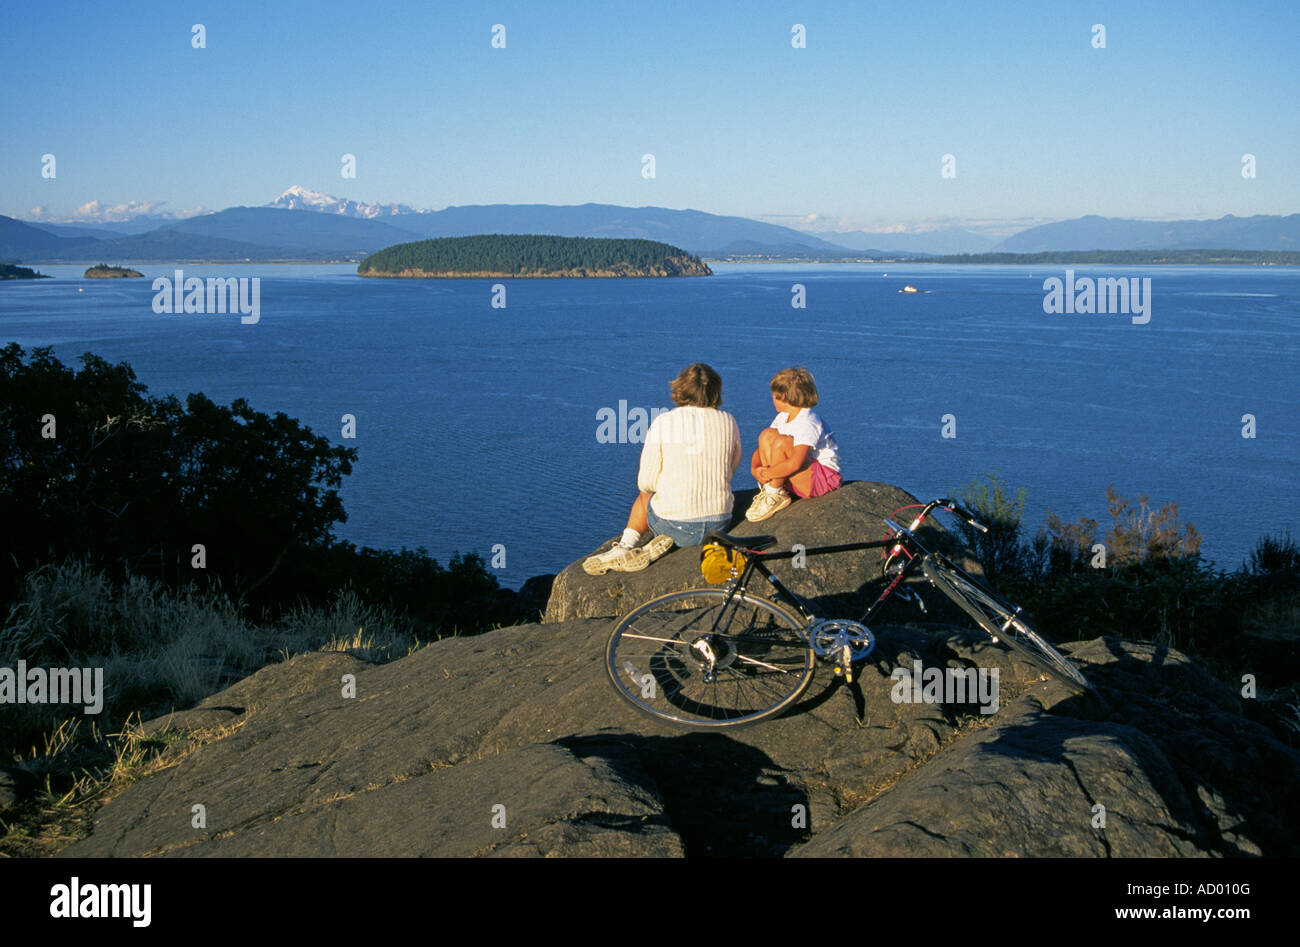 A mother and daughter on bicycles on the island of anacortes look for whales in Puget Sound in the San Juan Islands, Washington. Stock Photo